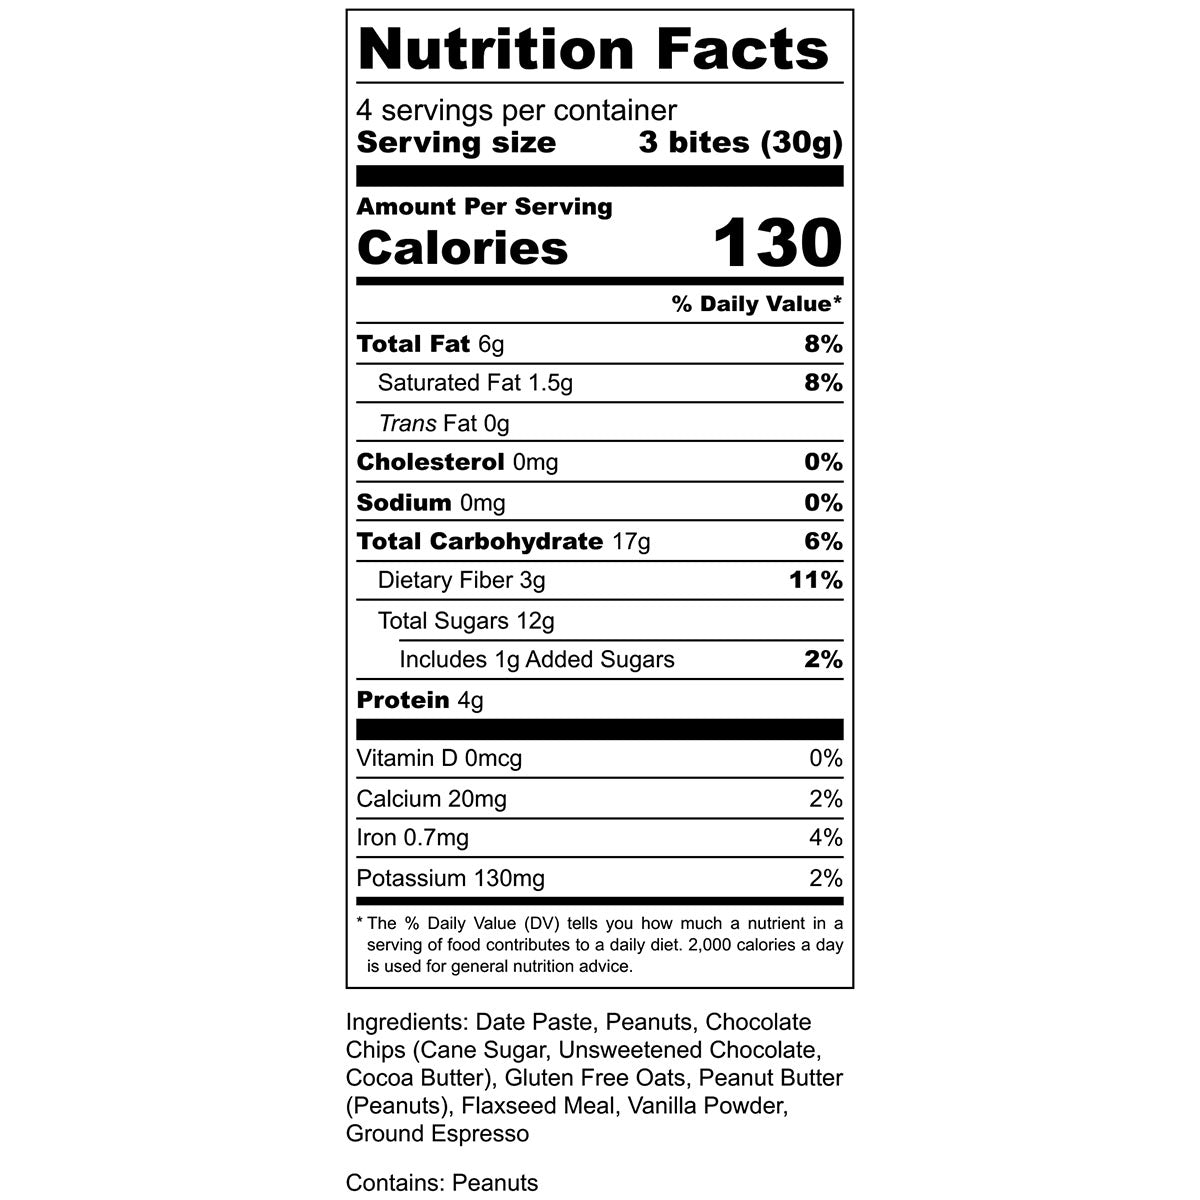 Nutrition Facts label showing a serving size of 3 bites, 130 calories, 6g fat, 17g carbs, 4g protein.